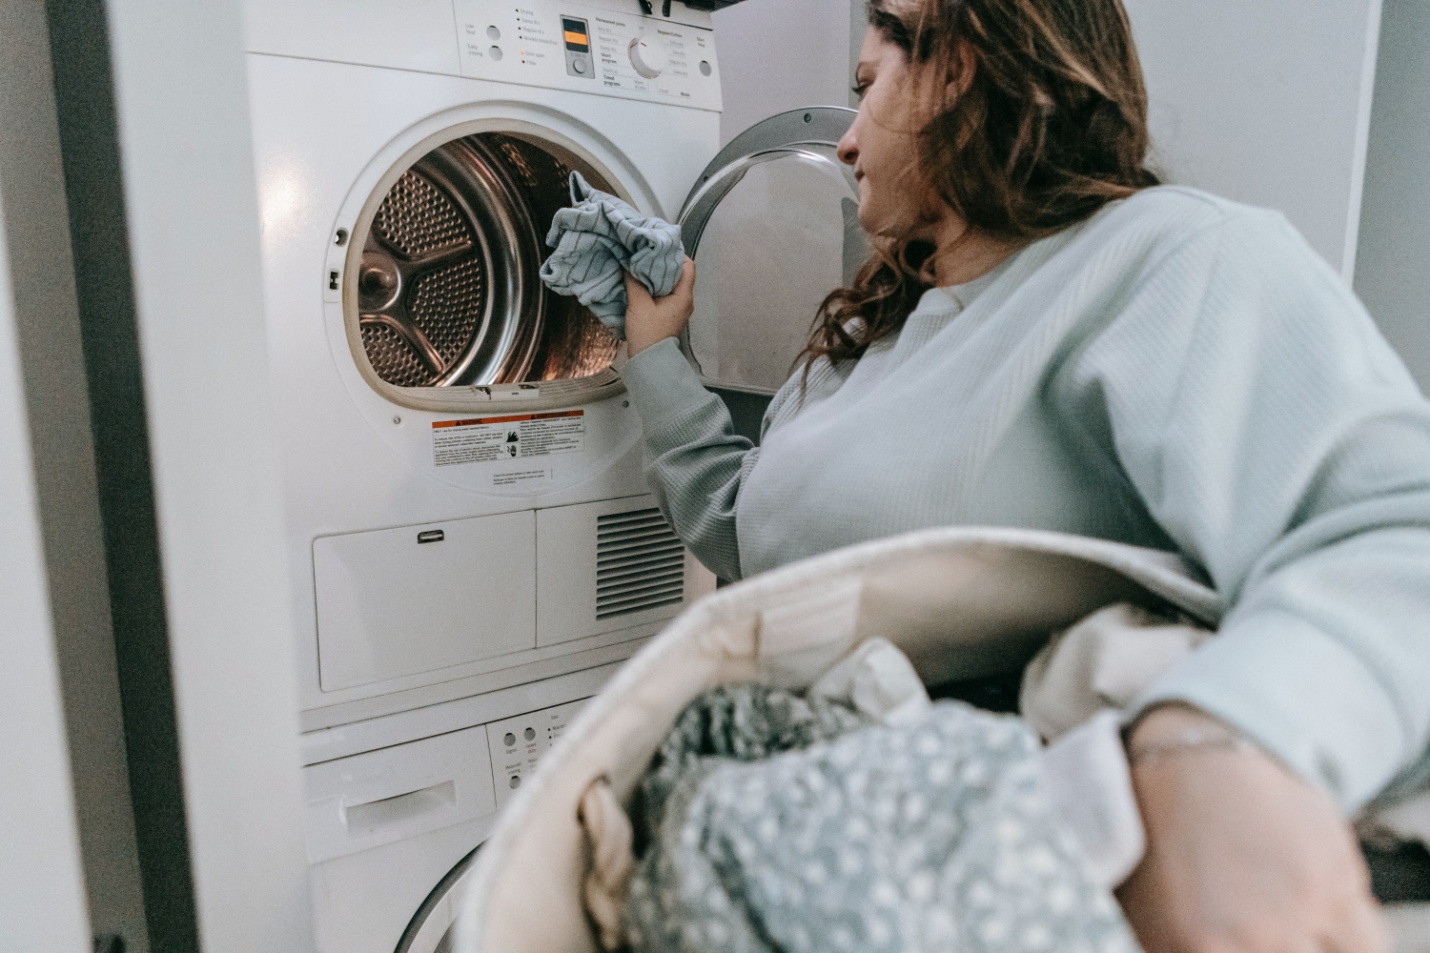 A woman loading the washer for the next wash